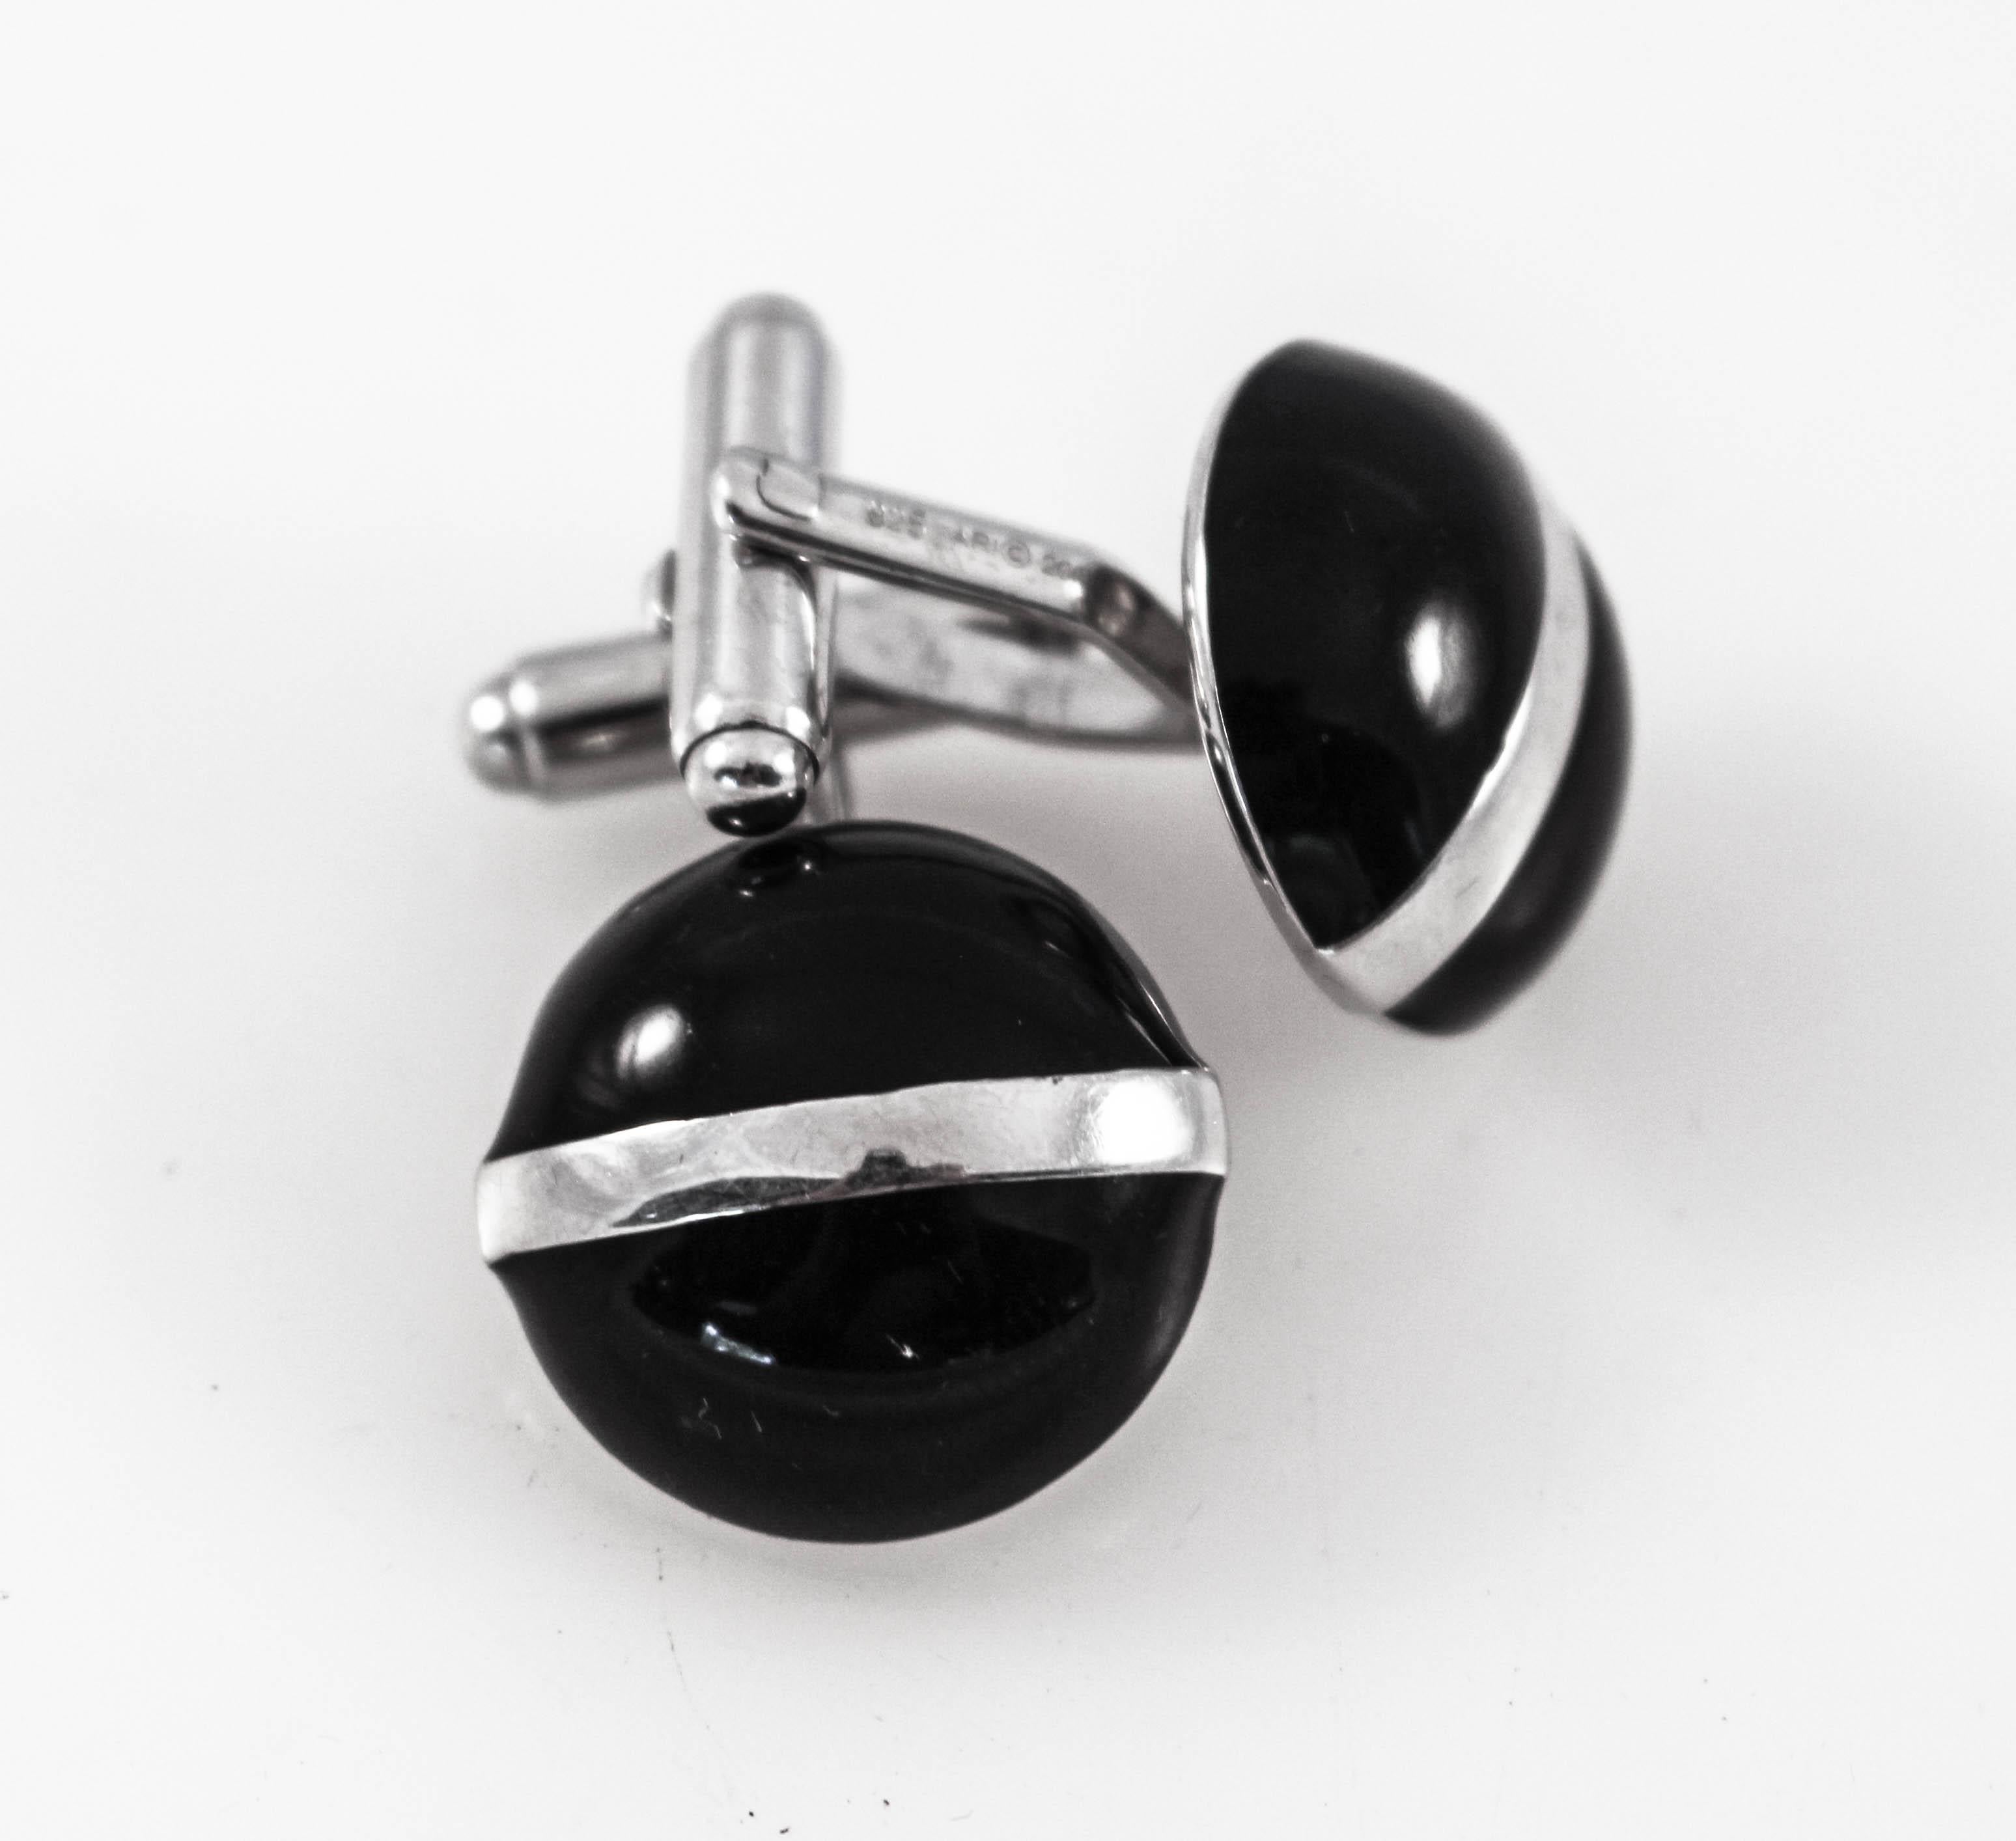 Just in time for Father’s Day and/or graduation, we are offering these sterling silver and onyx cufflinks. Made in England, they are black onyx with a silver stripe across the front. They are dressy and very chic. They can be worn with a suit or